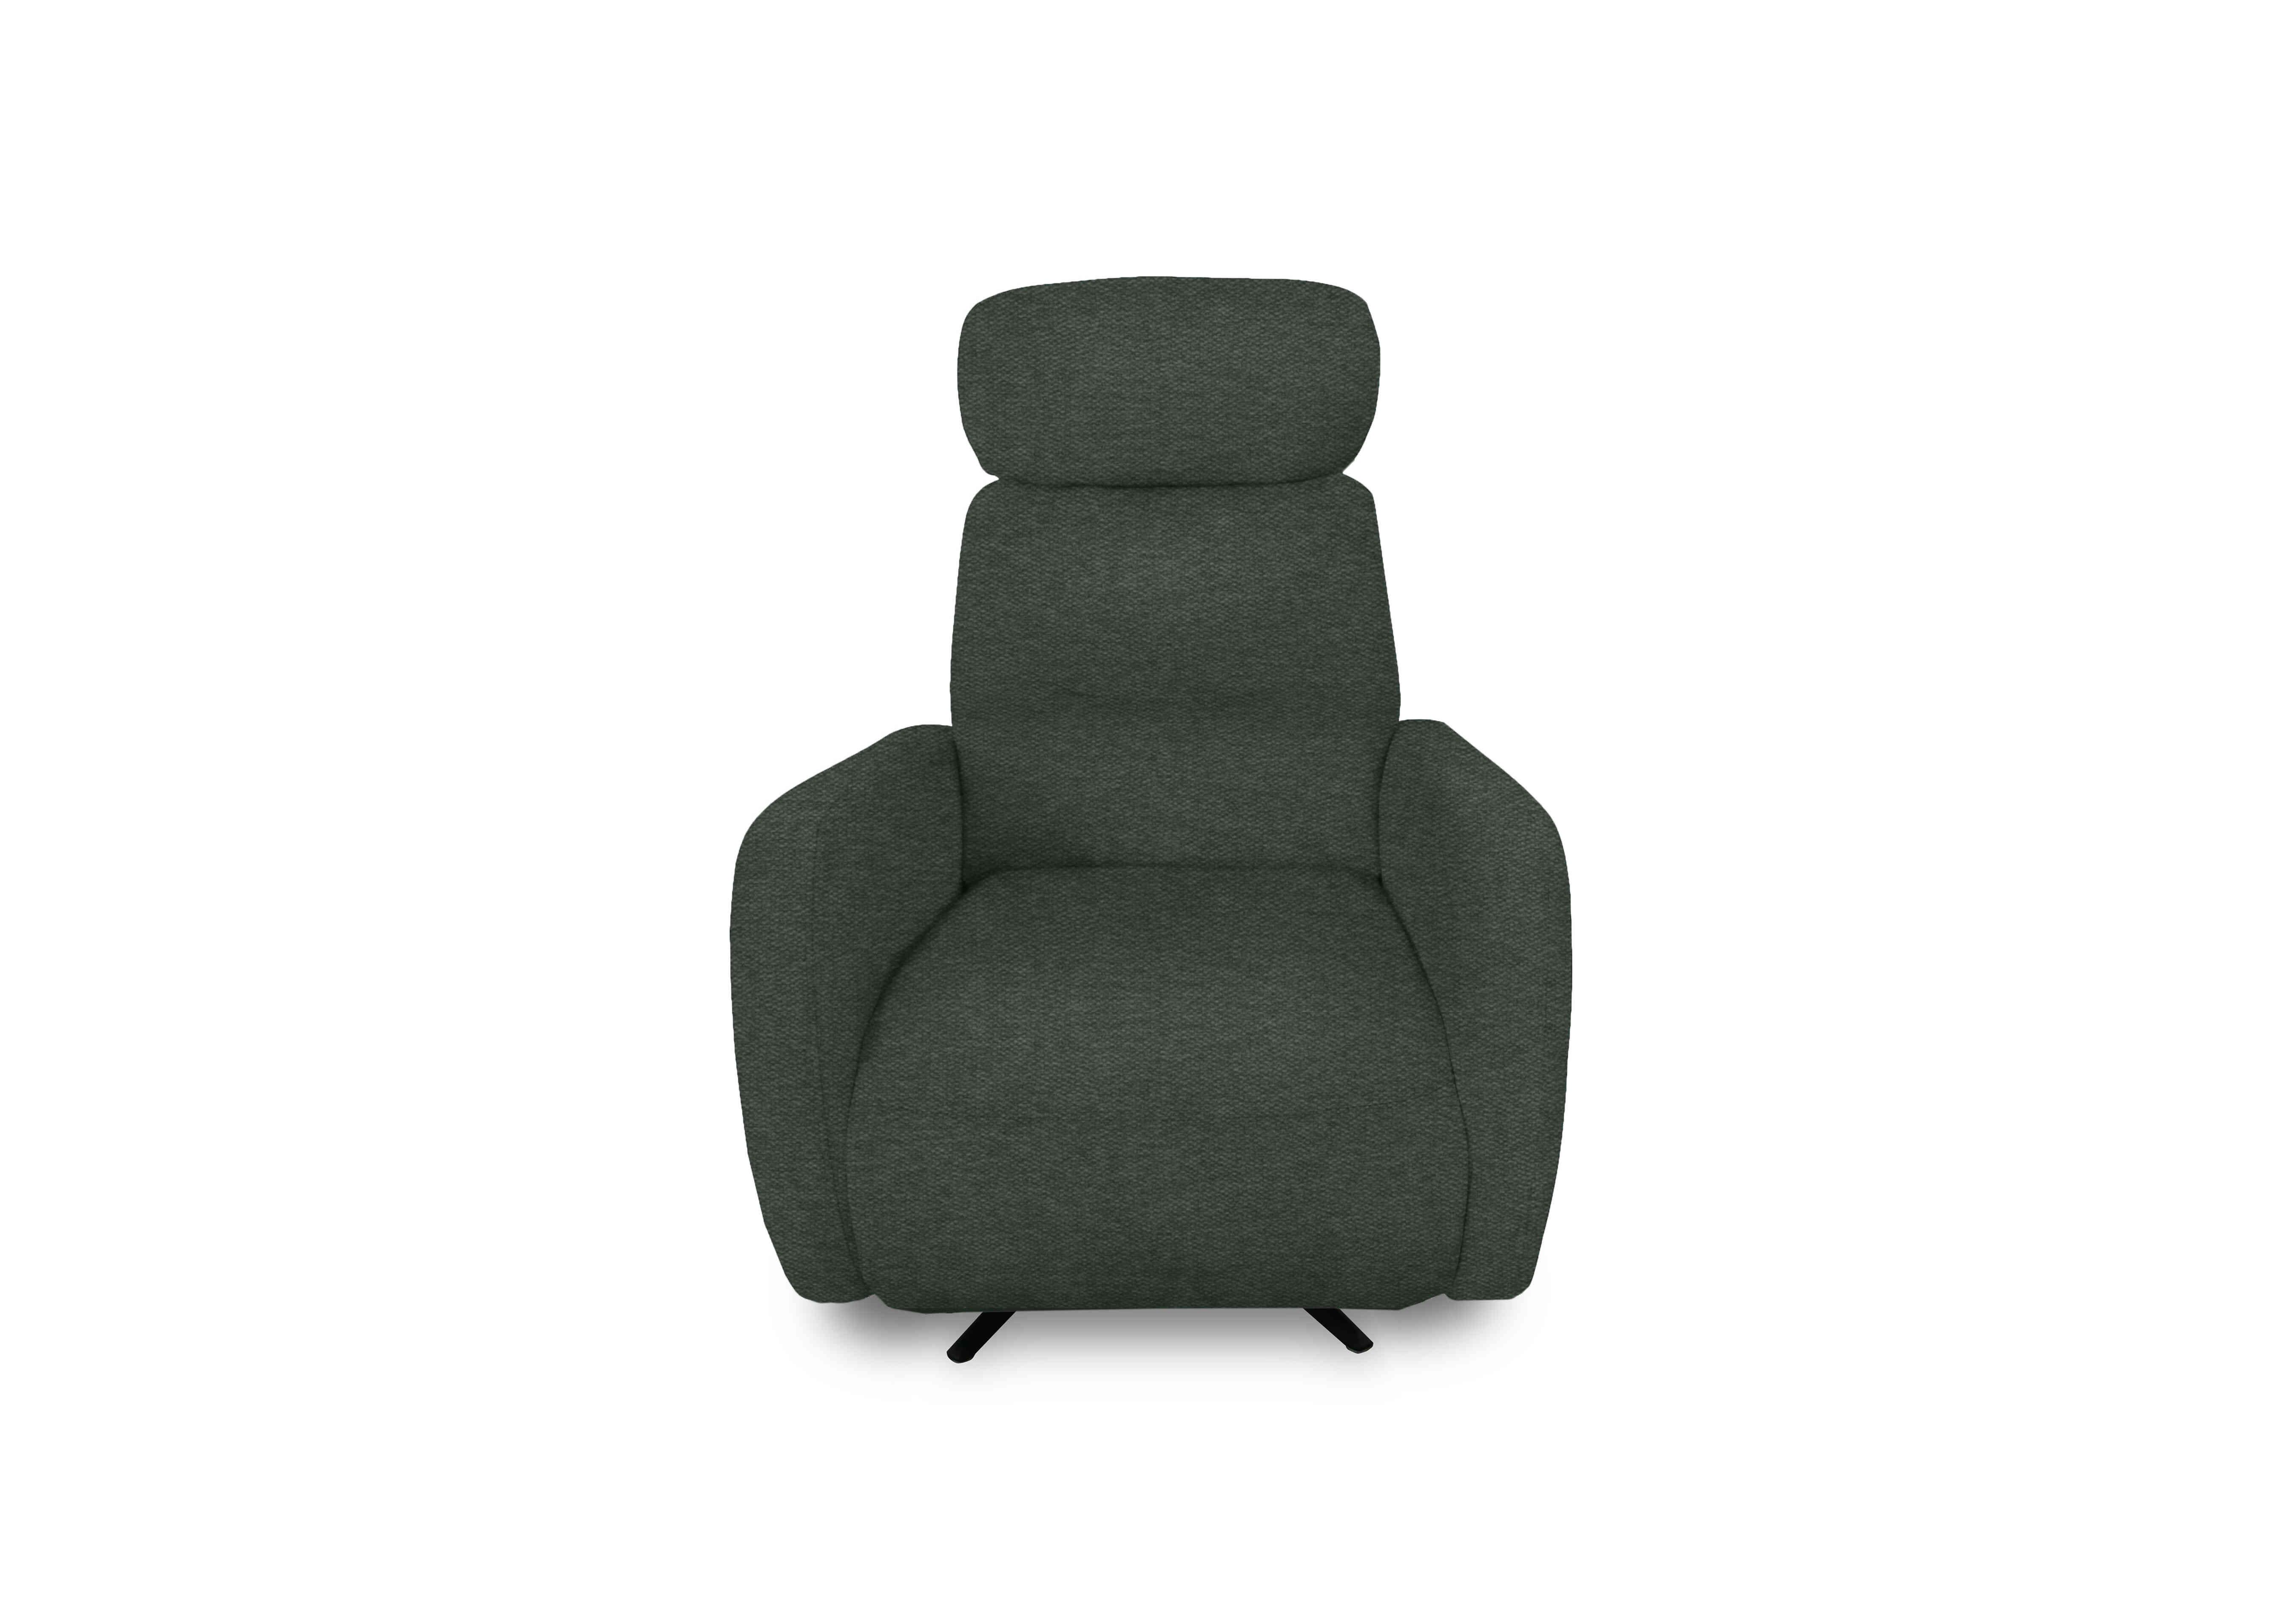 Designer Chair Collection Tokyo Fabric Manual Recliner Swivel Chair in Fab-Ska-R48 Moss Green on Furniture Village